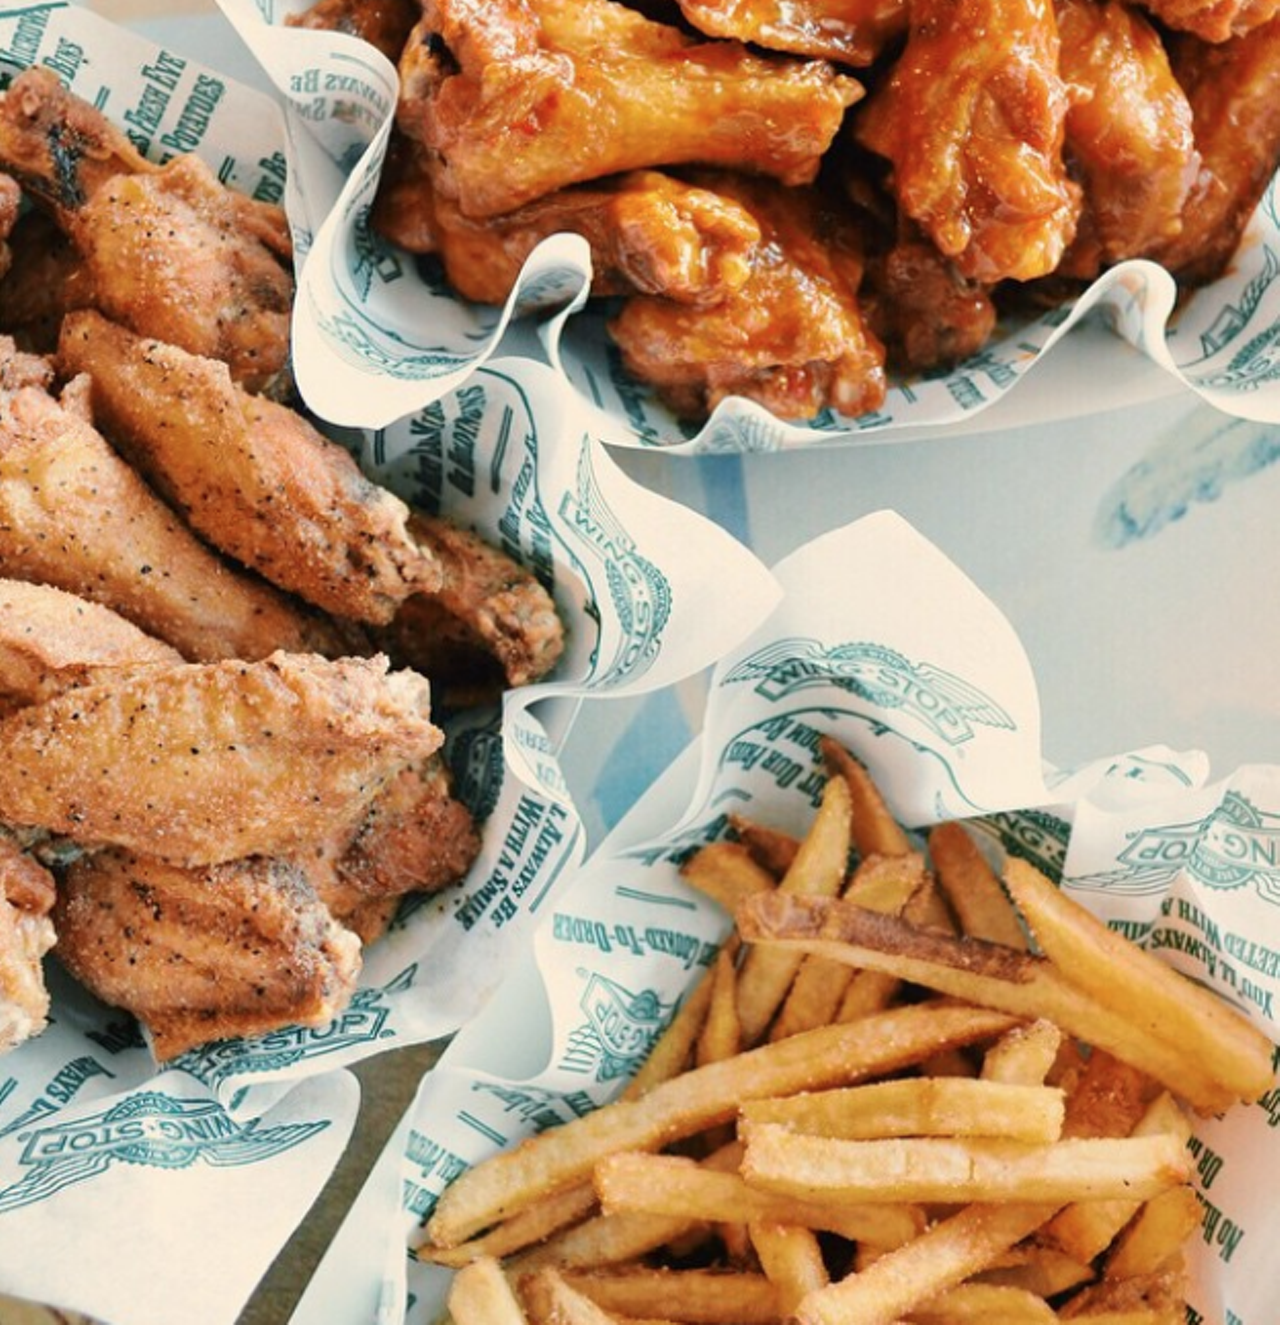 Wingstop
Multiple locations, wingstop.com
With an aviation theme to offer minimal decor, Wingstop offers flavorful wings, available classic style or boneless. The Dallas-based chain has also expanded its menu recently, adding flavored fries, seasonal flavors and new sides like Cajun Fried Corn. And those fries? They’re the cherry on top, most definitely.
Photo via Instagram / wingstop